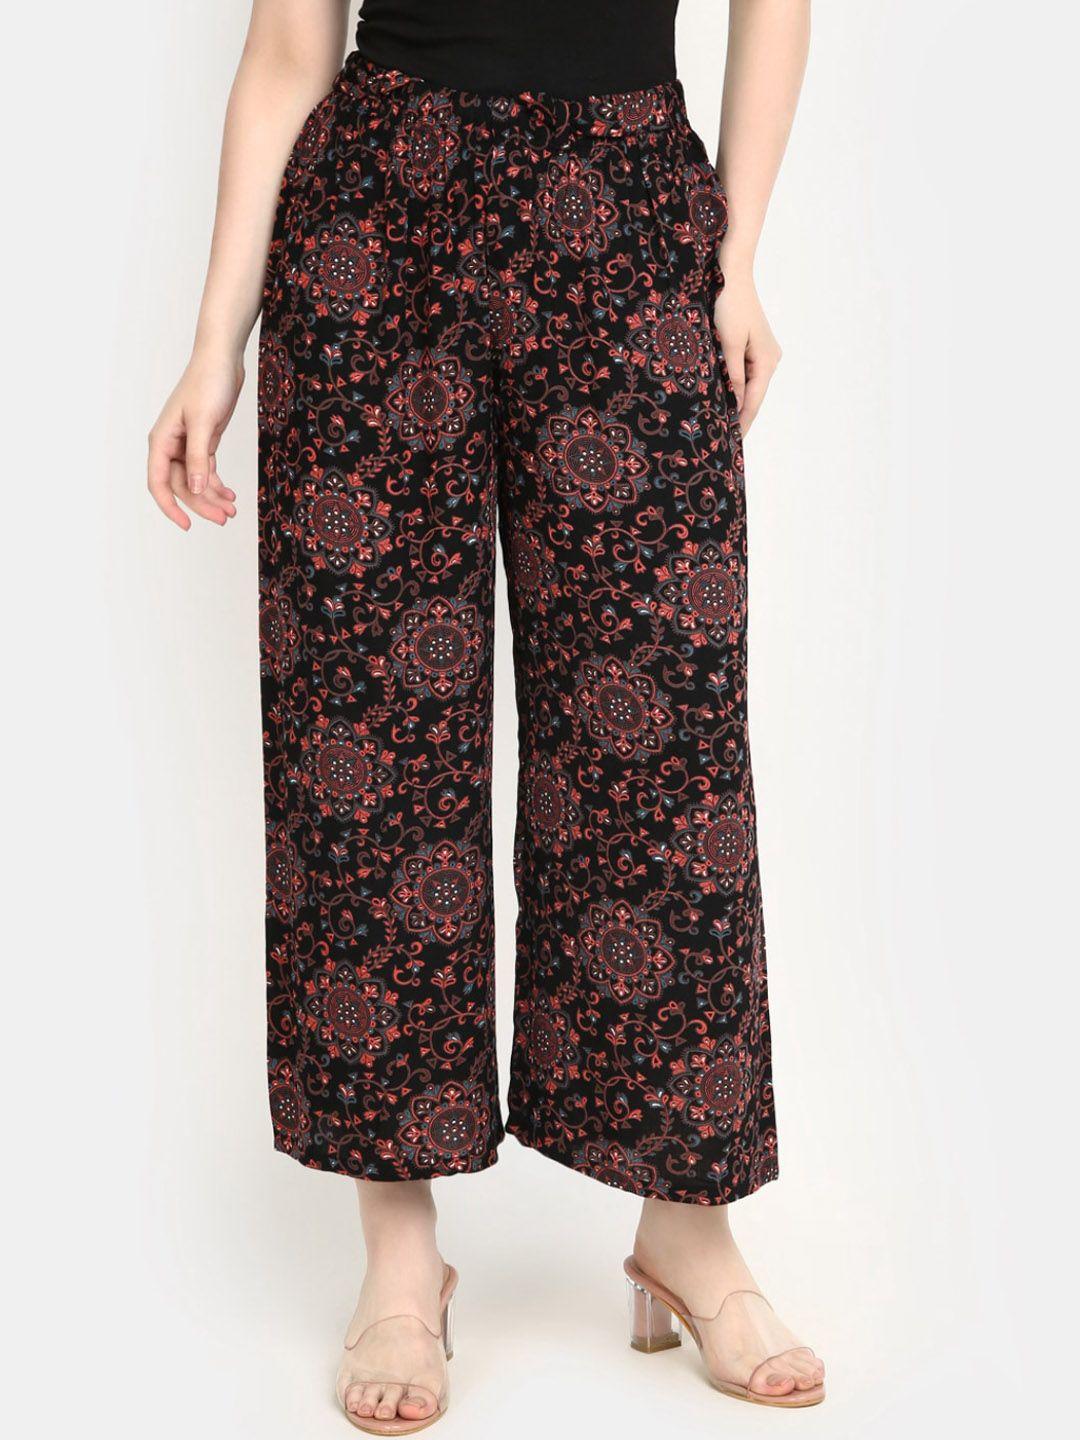 v-mart women floral printed trousers